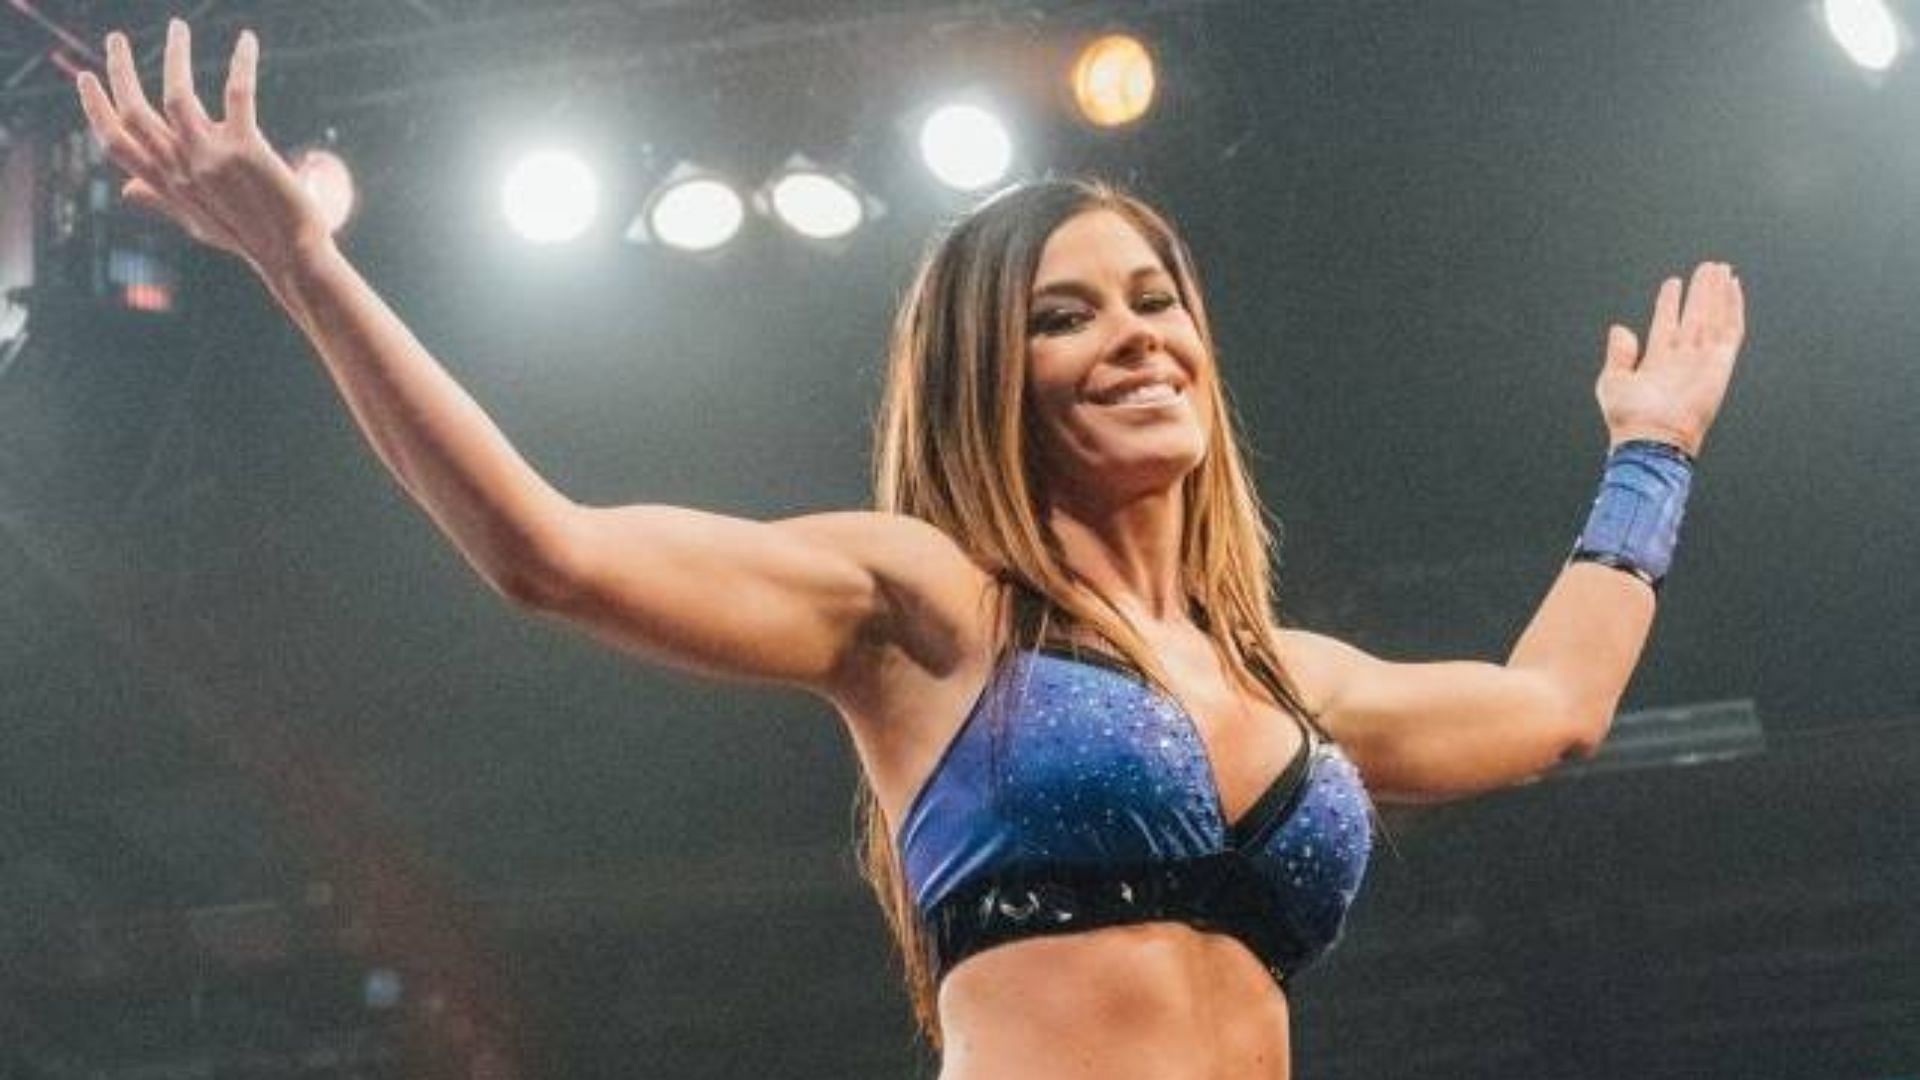 Madison Rayne is the newest member of the AEW roster